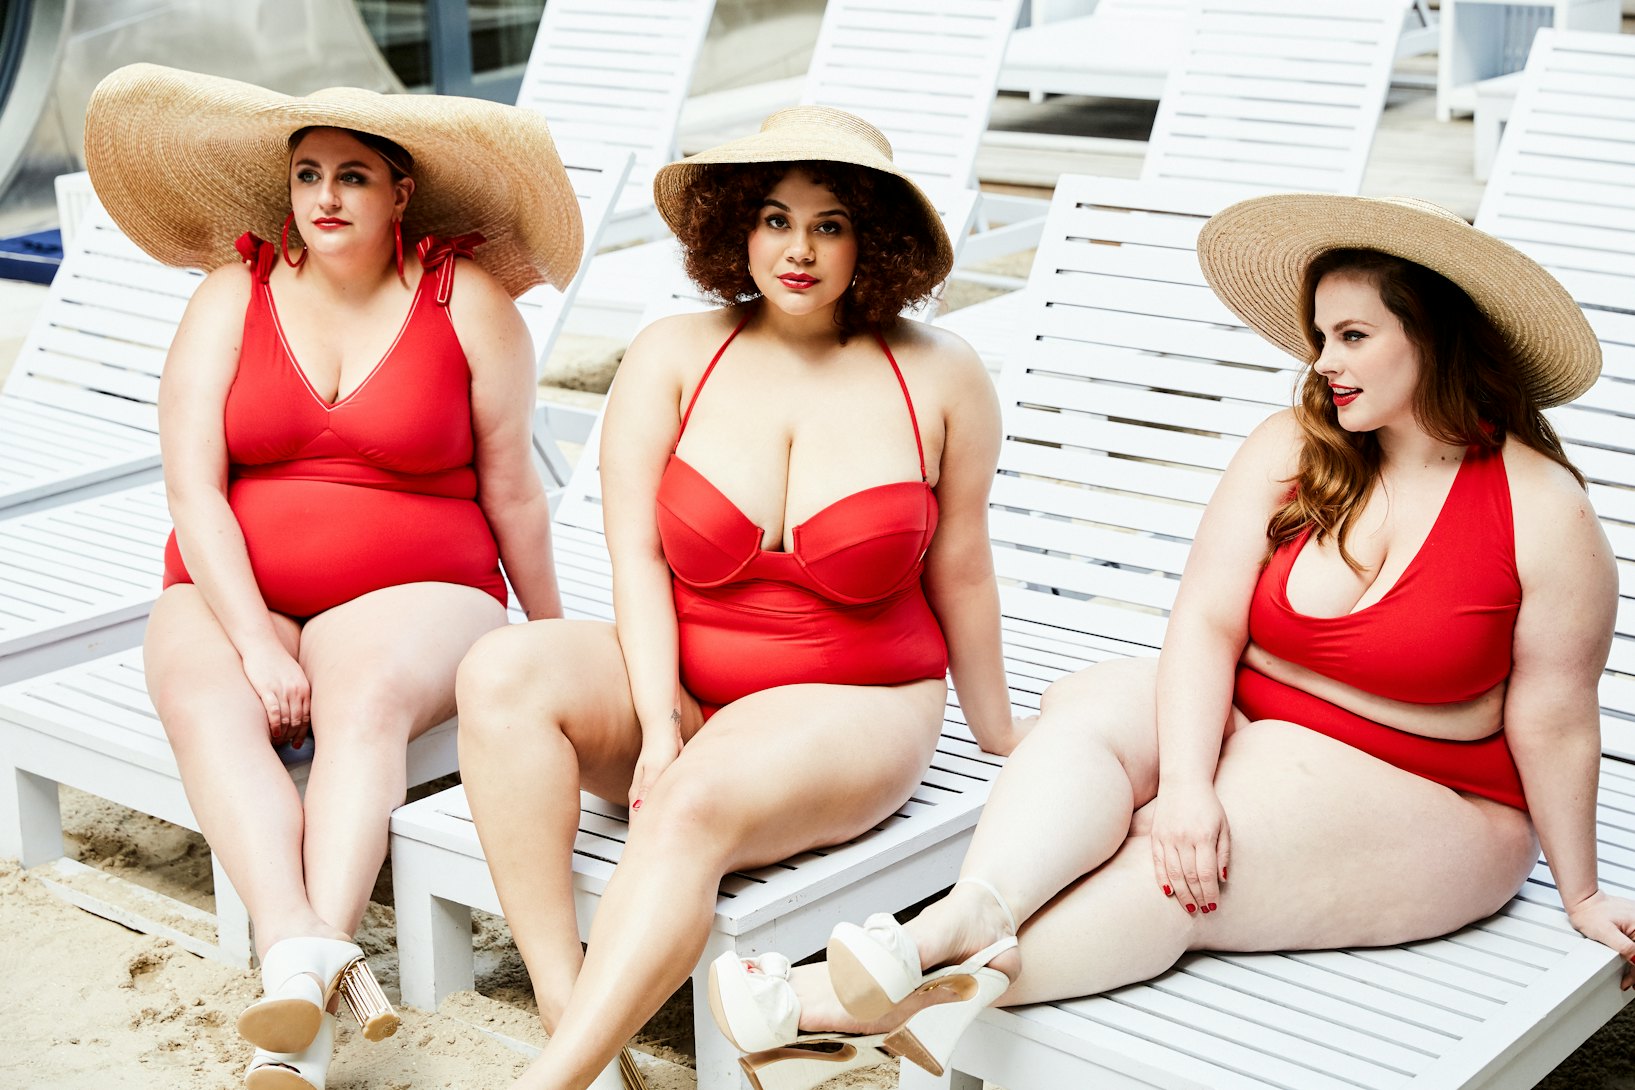 The Best Swimsuits For Plus Sizes, Because We've Got More Options Than Ever